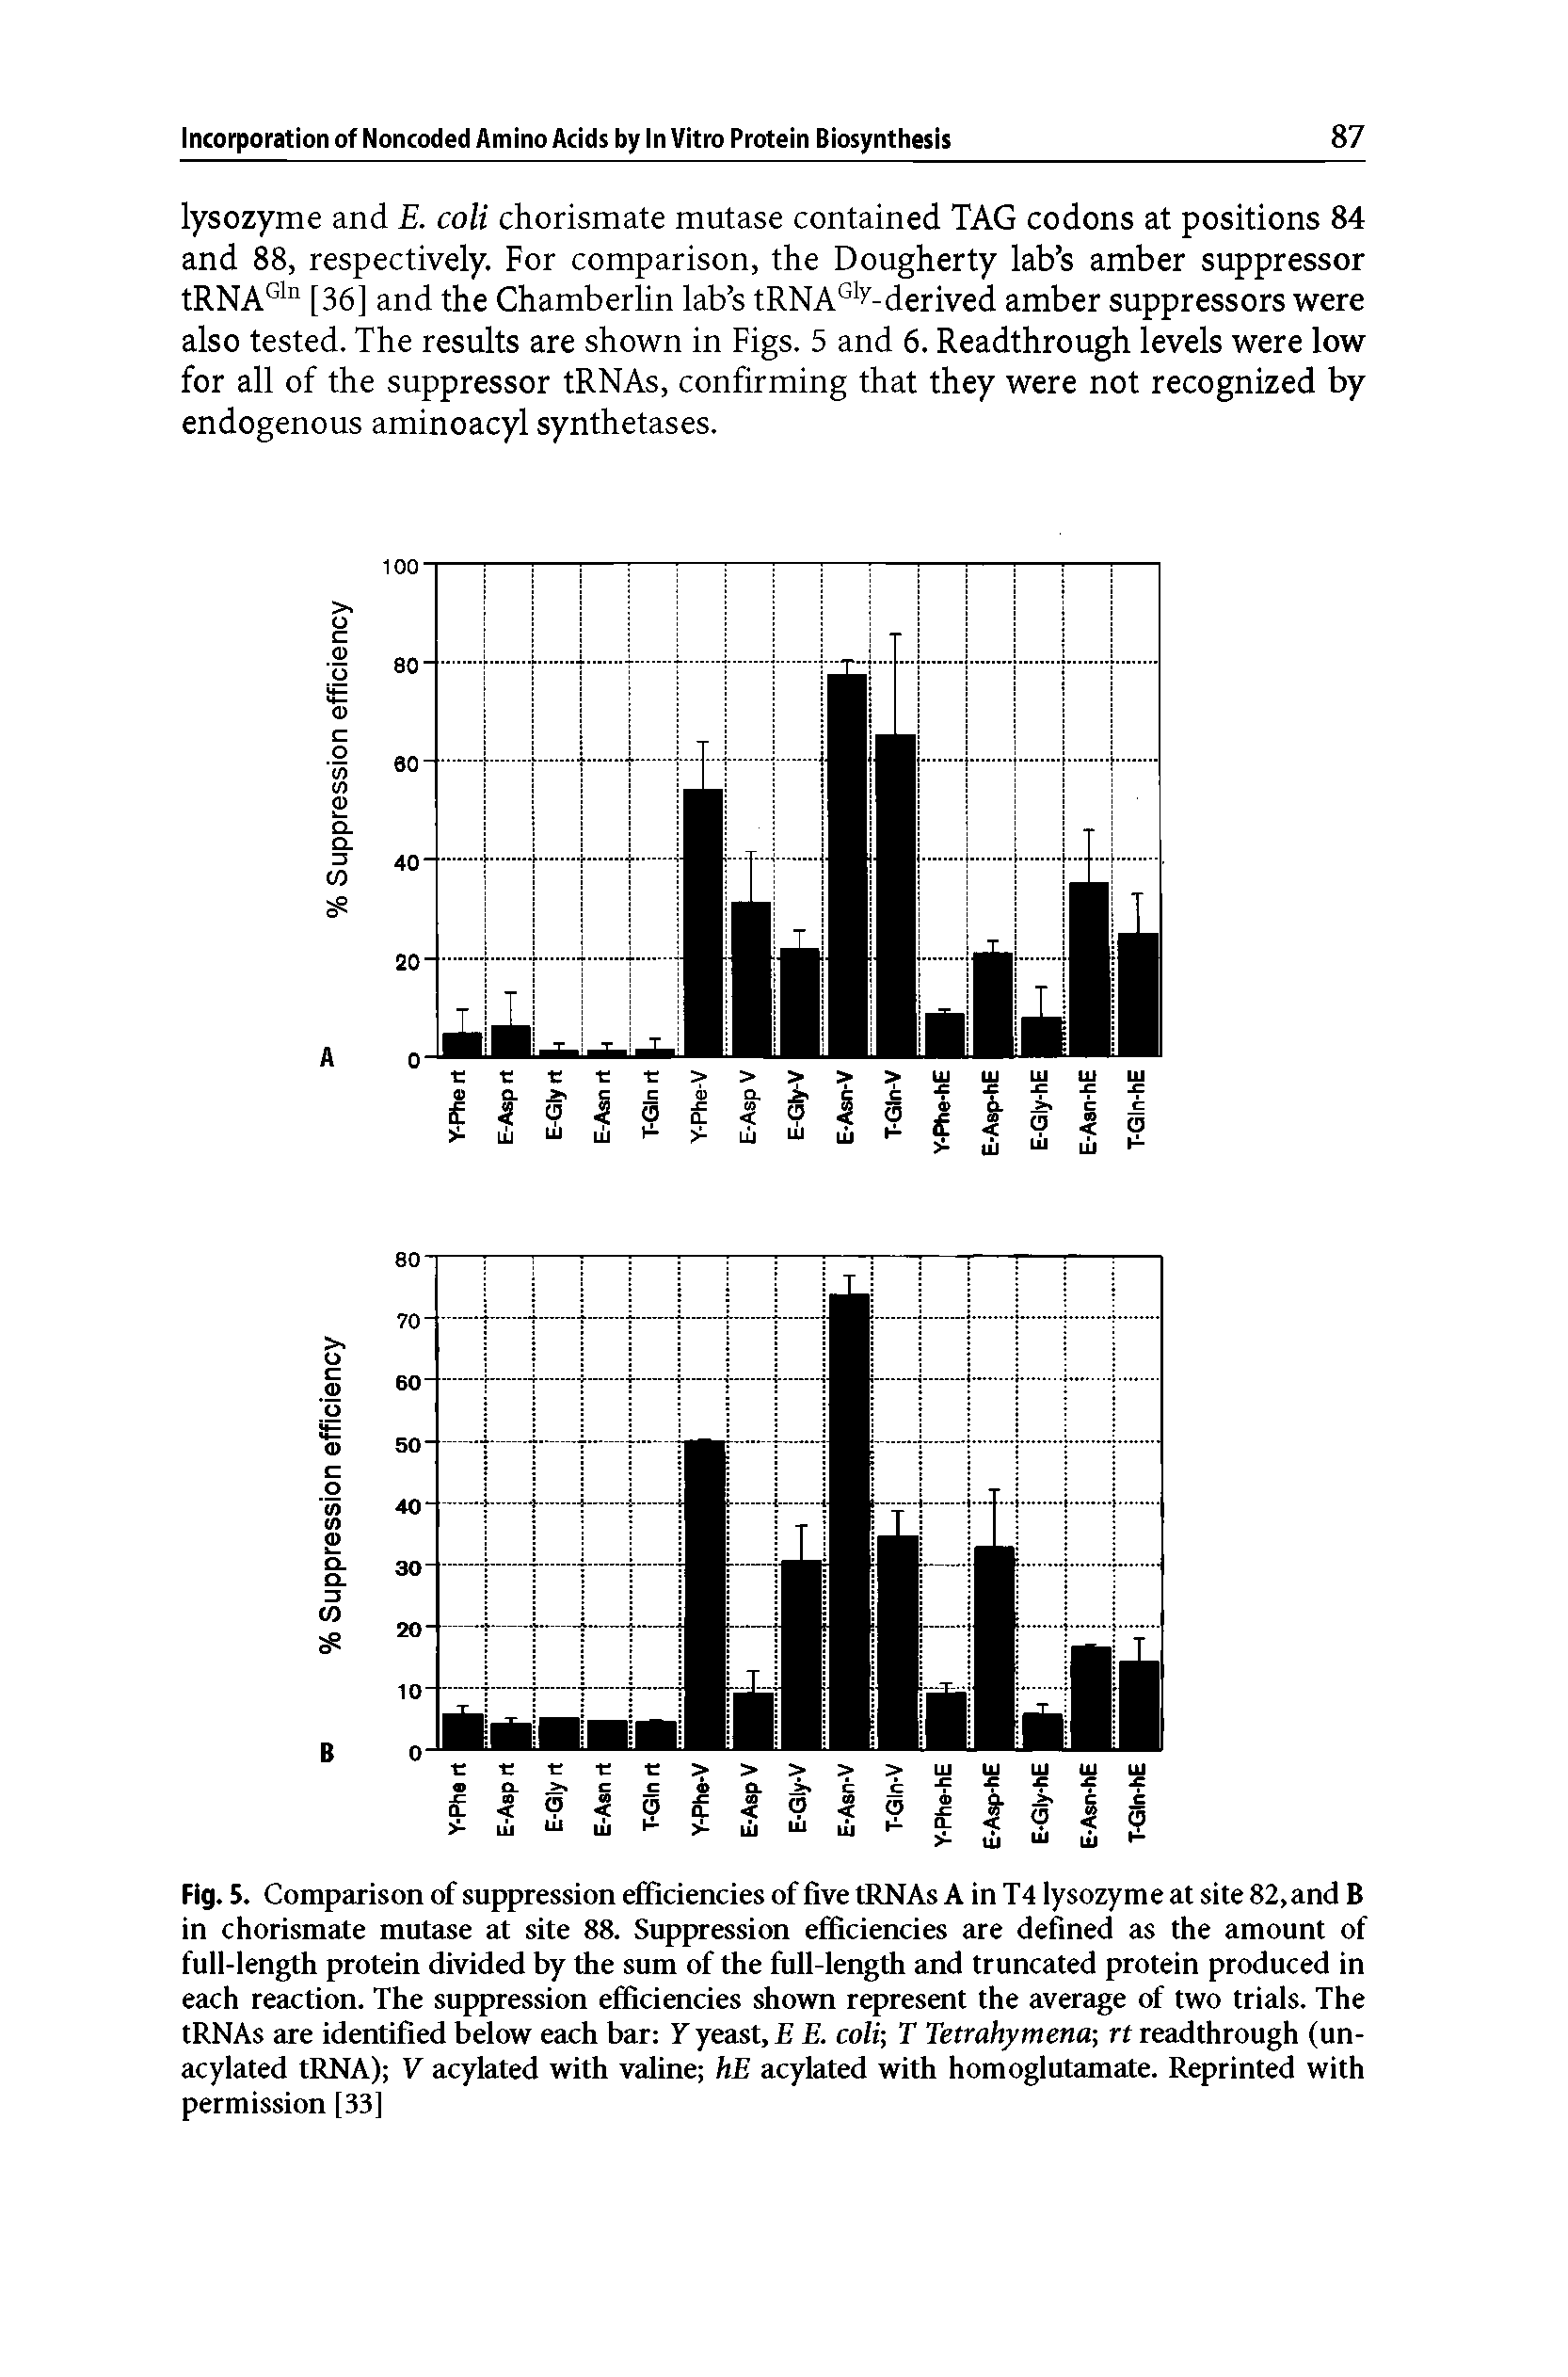 Fig. 5. Comparison of suppression efficiencies of five tRNAs A in T4 lysozyme at site 82, and B in chorismate mutase at site 88. Suppression efficiencies are defined as the amount of full-length protein divided by the sum of the full-length and truncated protein produced in each reaction. The suppression efficiencies shown represent the average of two trials. The tRNAs are identified below each bar Y yeast, E E. coli T Tetrahymena rt readthrough (un-acylated tRNA) V acylated with valine hE acylated with homoglutamate. Reprinted with permission [33]...